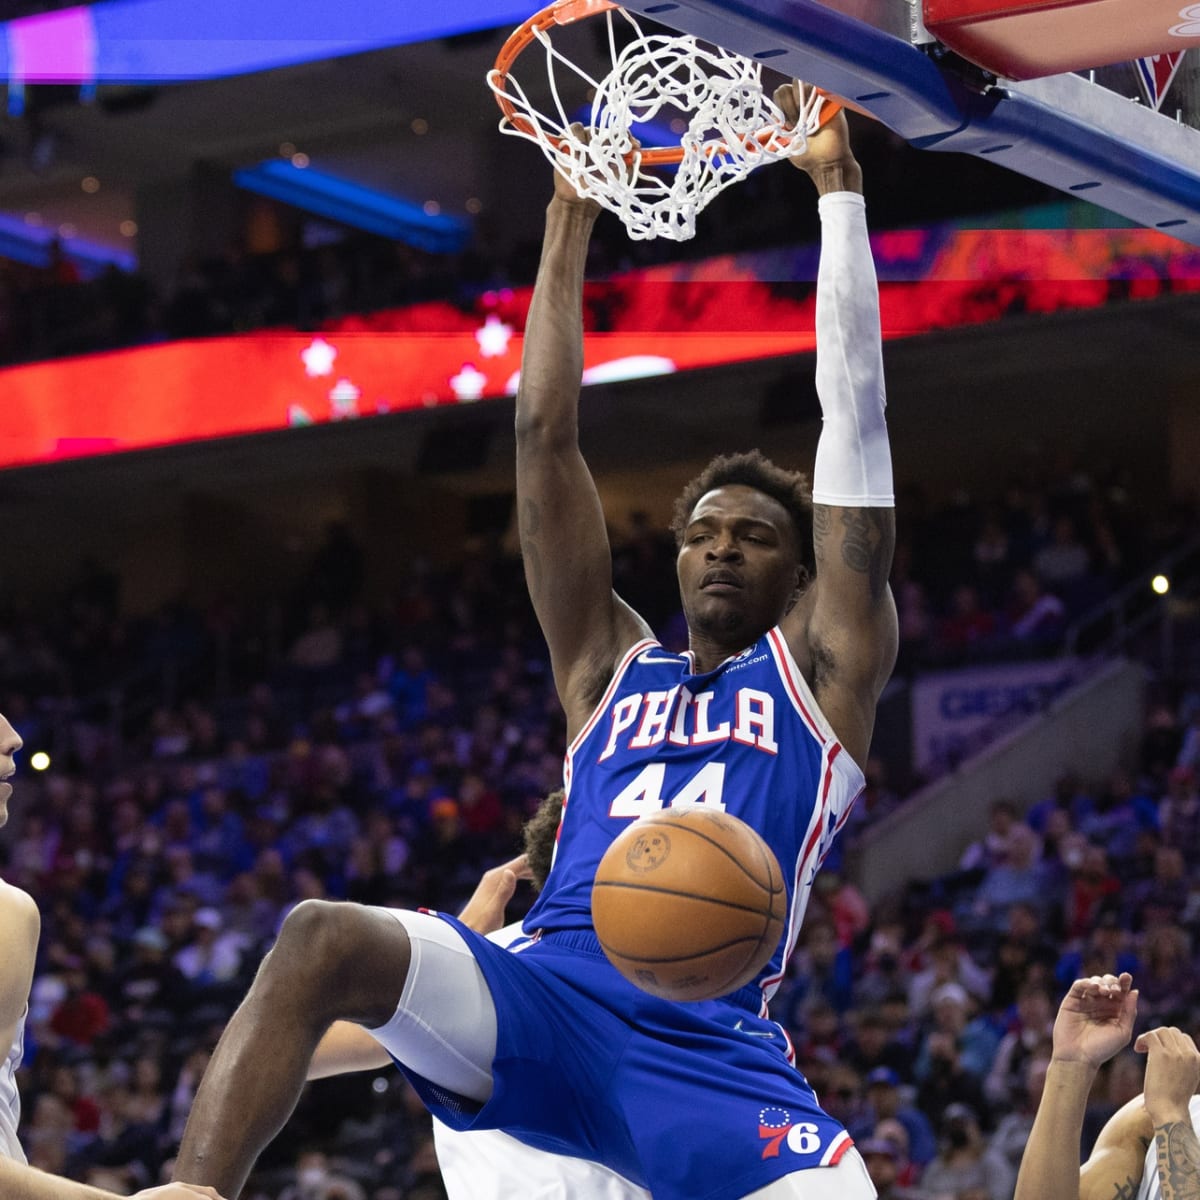 Paul Reed's stellar ascent: From Sixers backup to a potential starting role